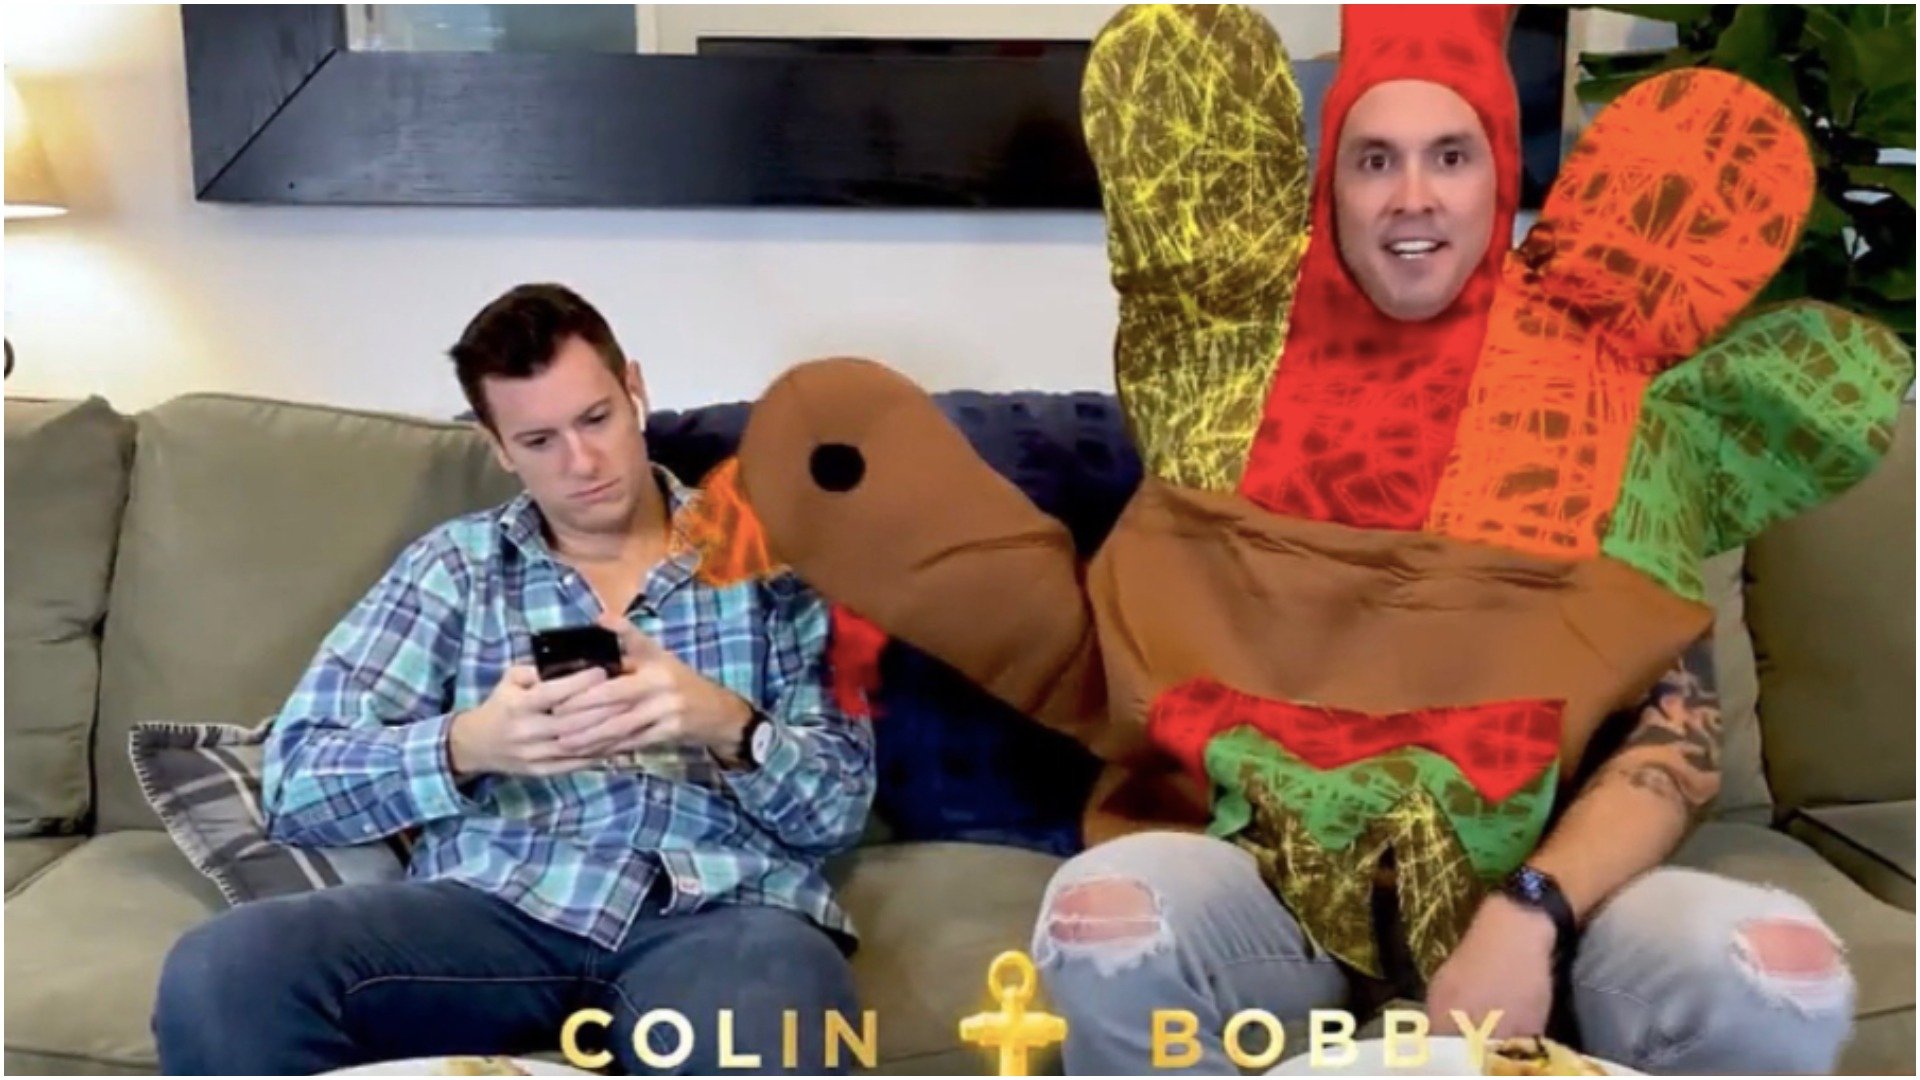 Colin Macy-O'Toole looks at his phone while Bobby Giancola wears a turkey costume while sitting on the couch